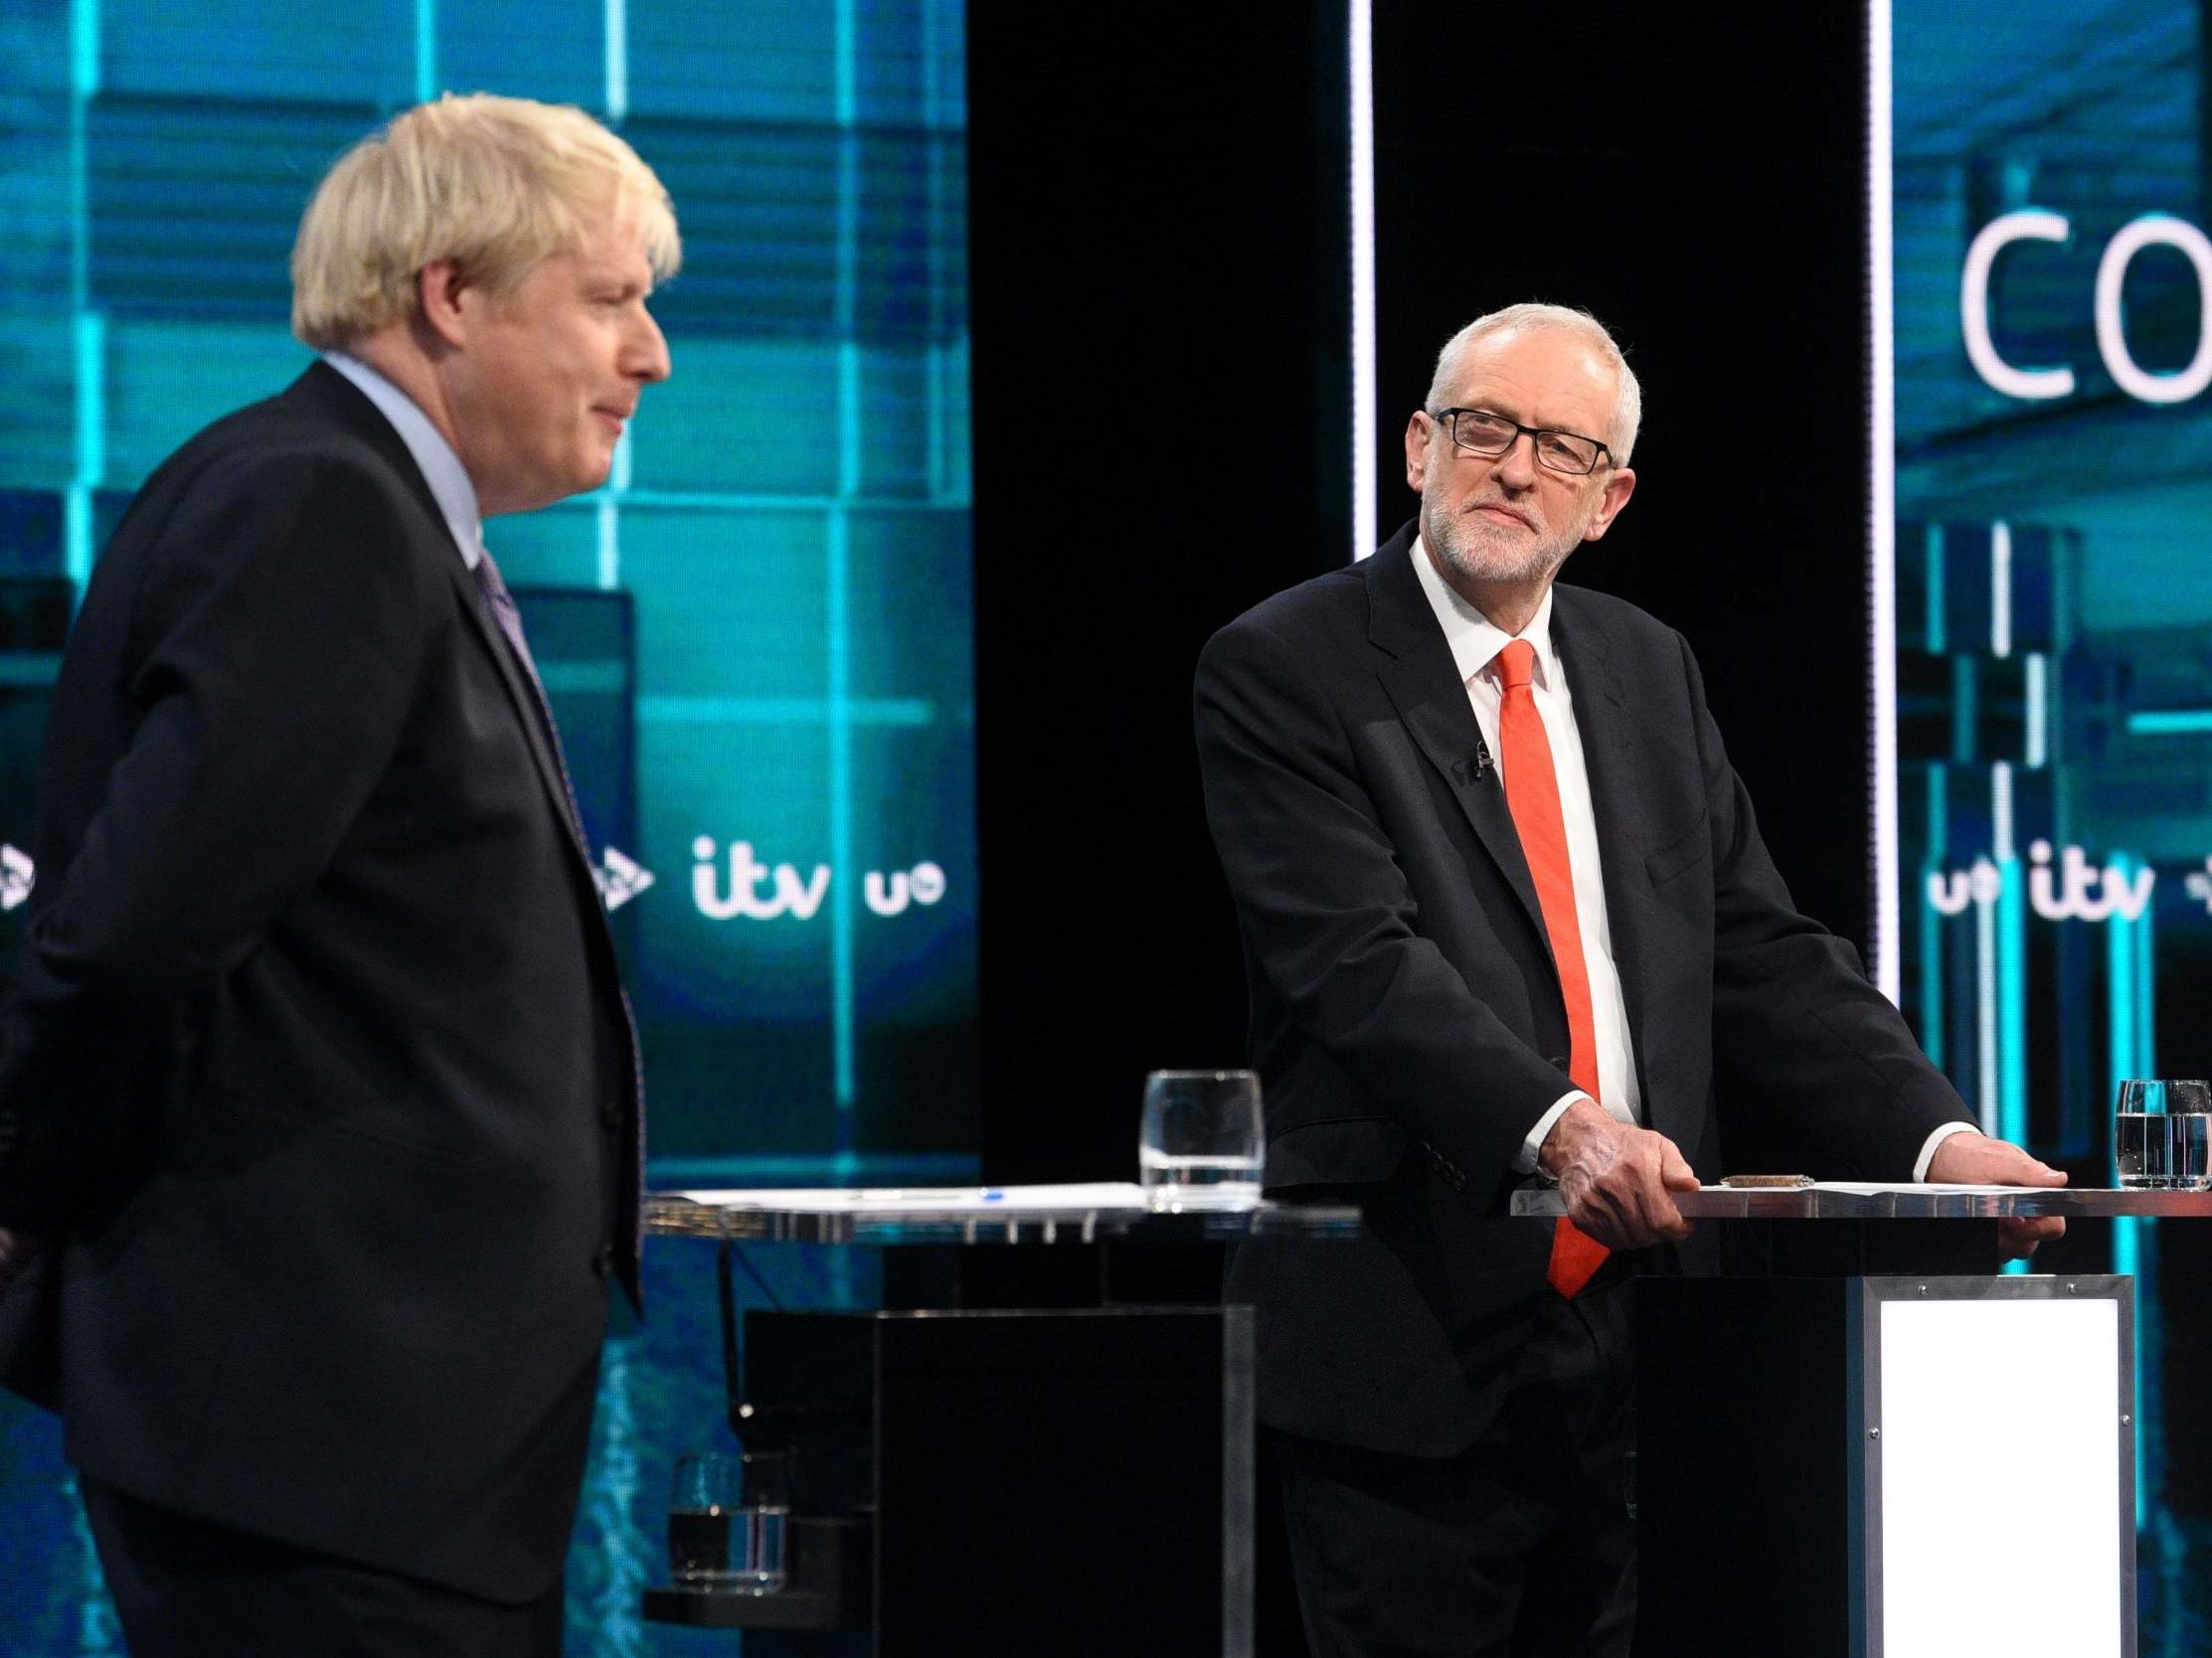 Leaders' election TV debate cancelled after Boris Johnson refuses to take part